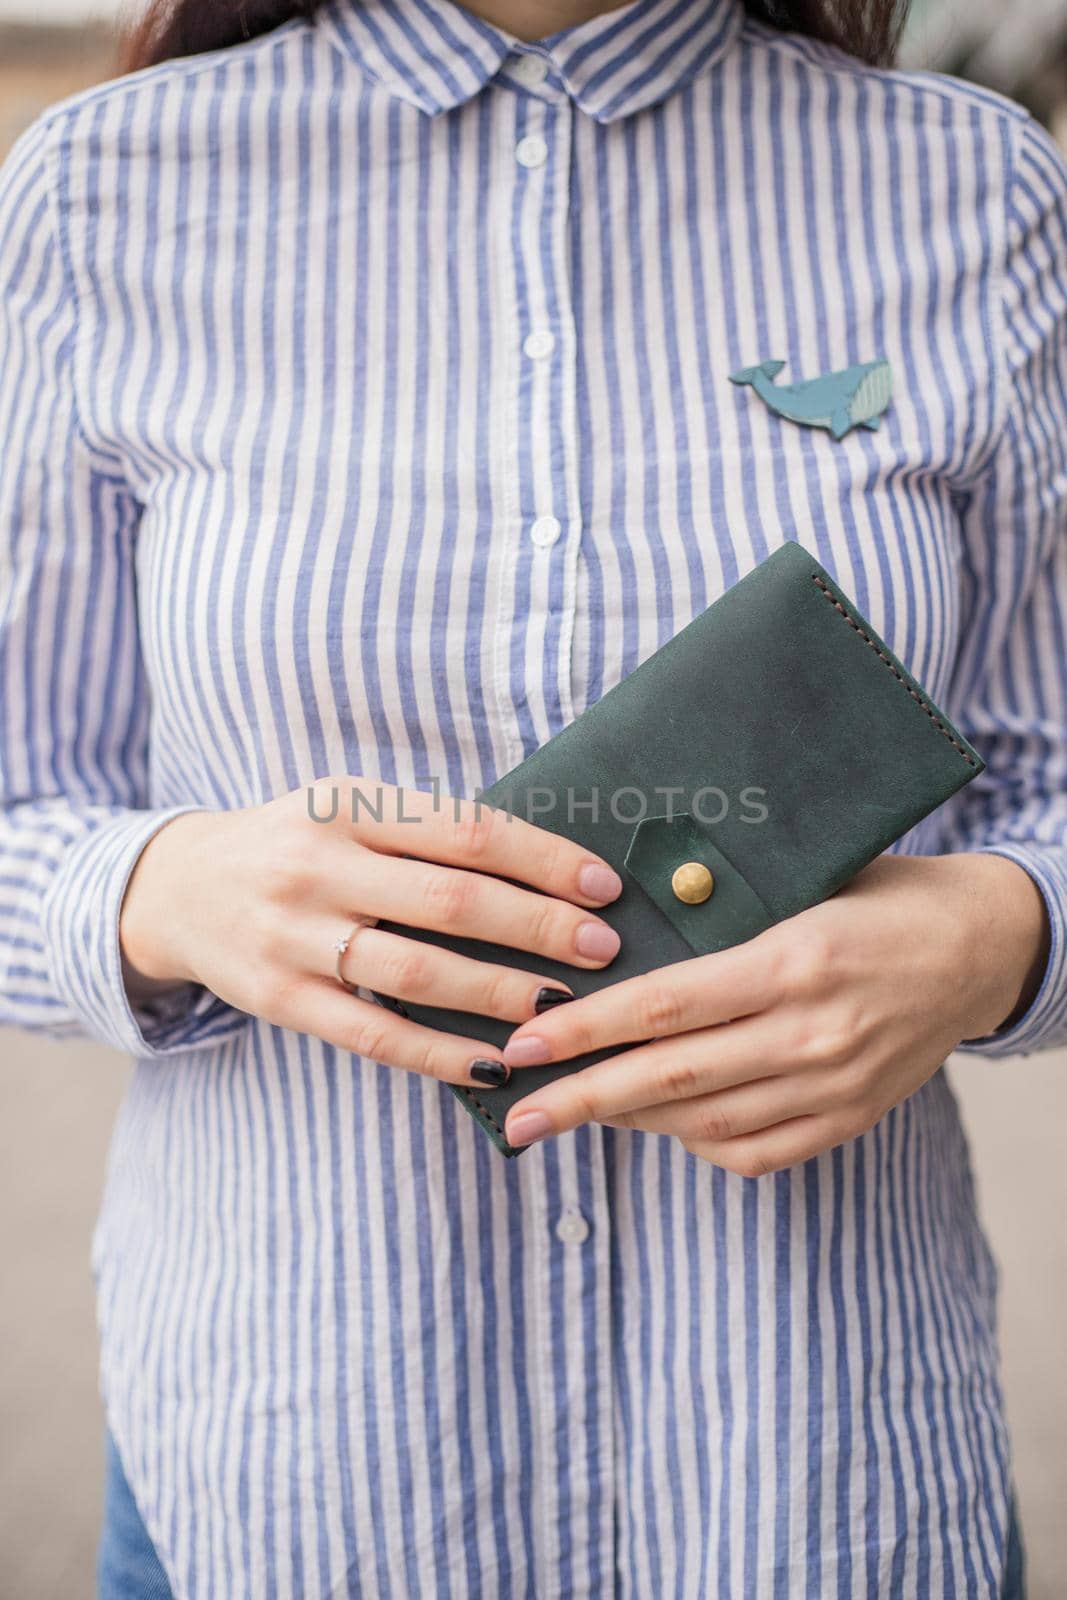 Sky blue handbag purse and beautiful woman hand with manicure. blurred background